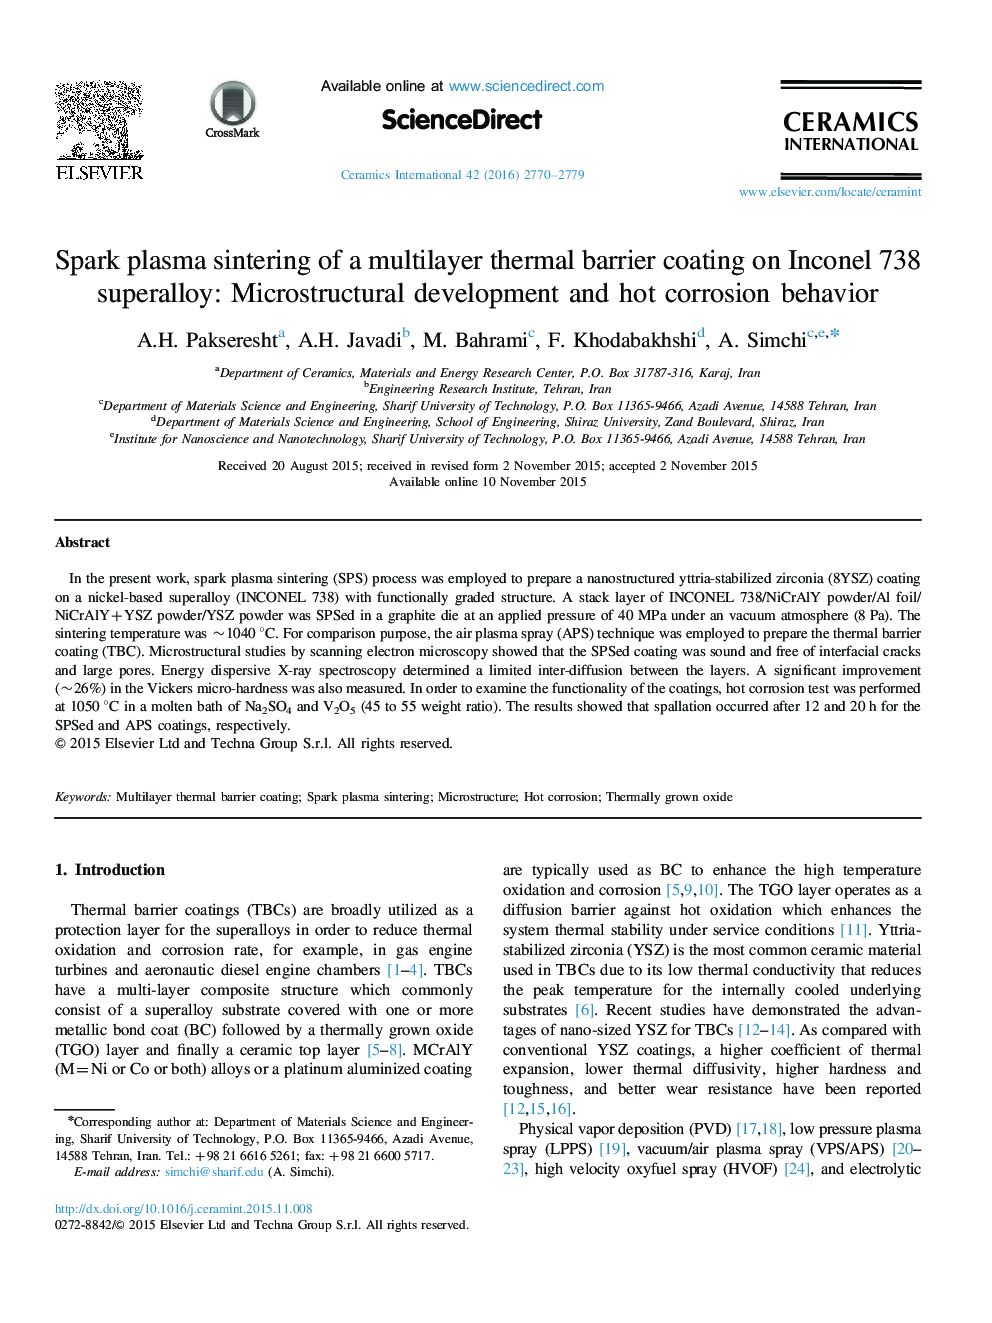 Spark plasma sintering of a multilayer thermal barrier coating on Inconel 738 superalloy: Microstructural development and hot corrosion behavior